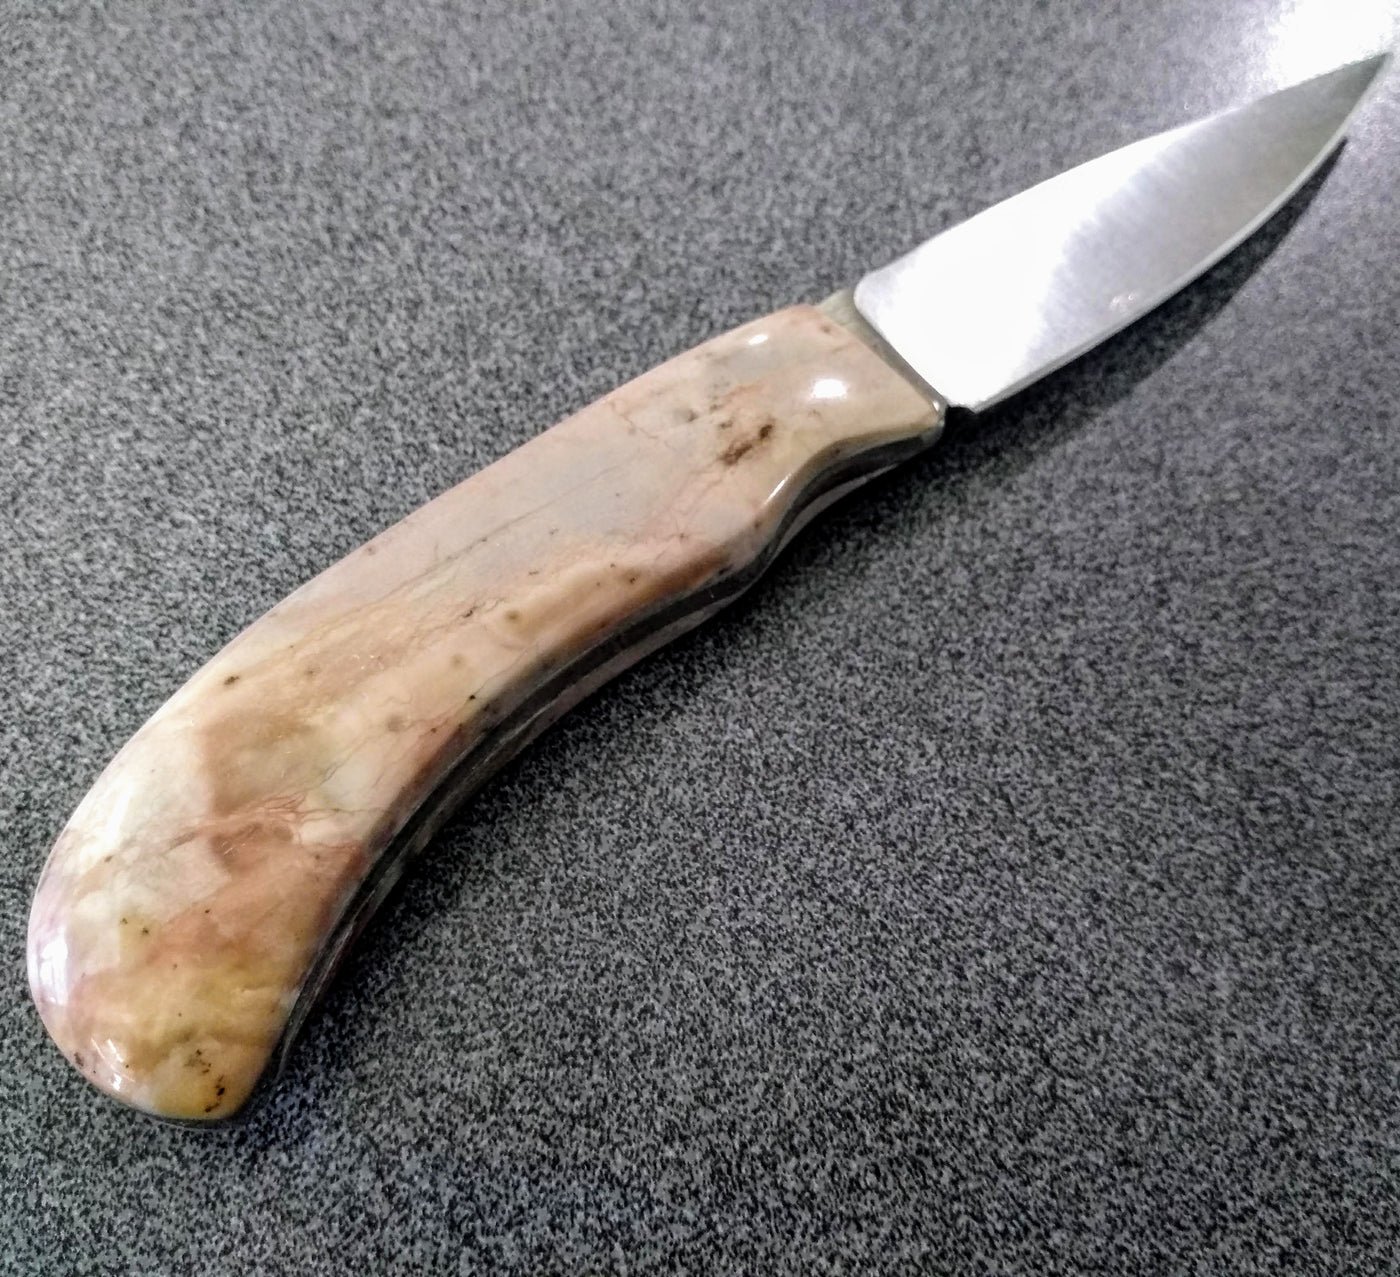 LOC-11 Small Game/Paring Knife, Agate